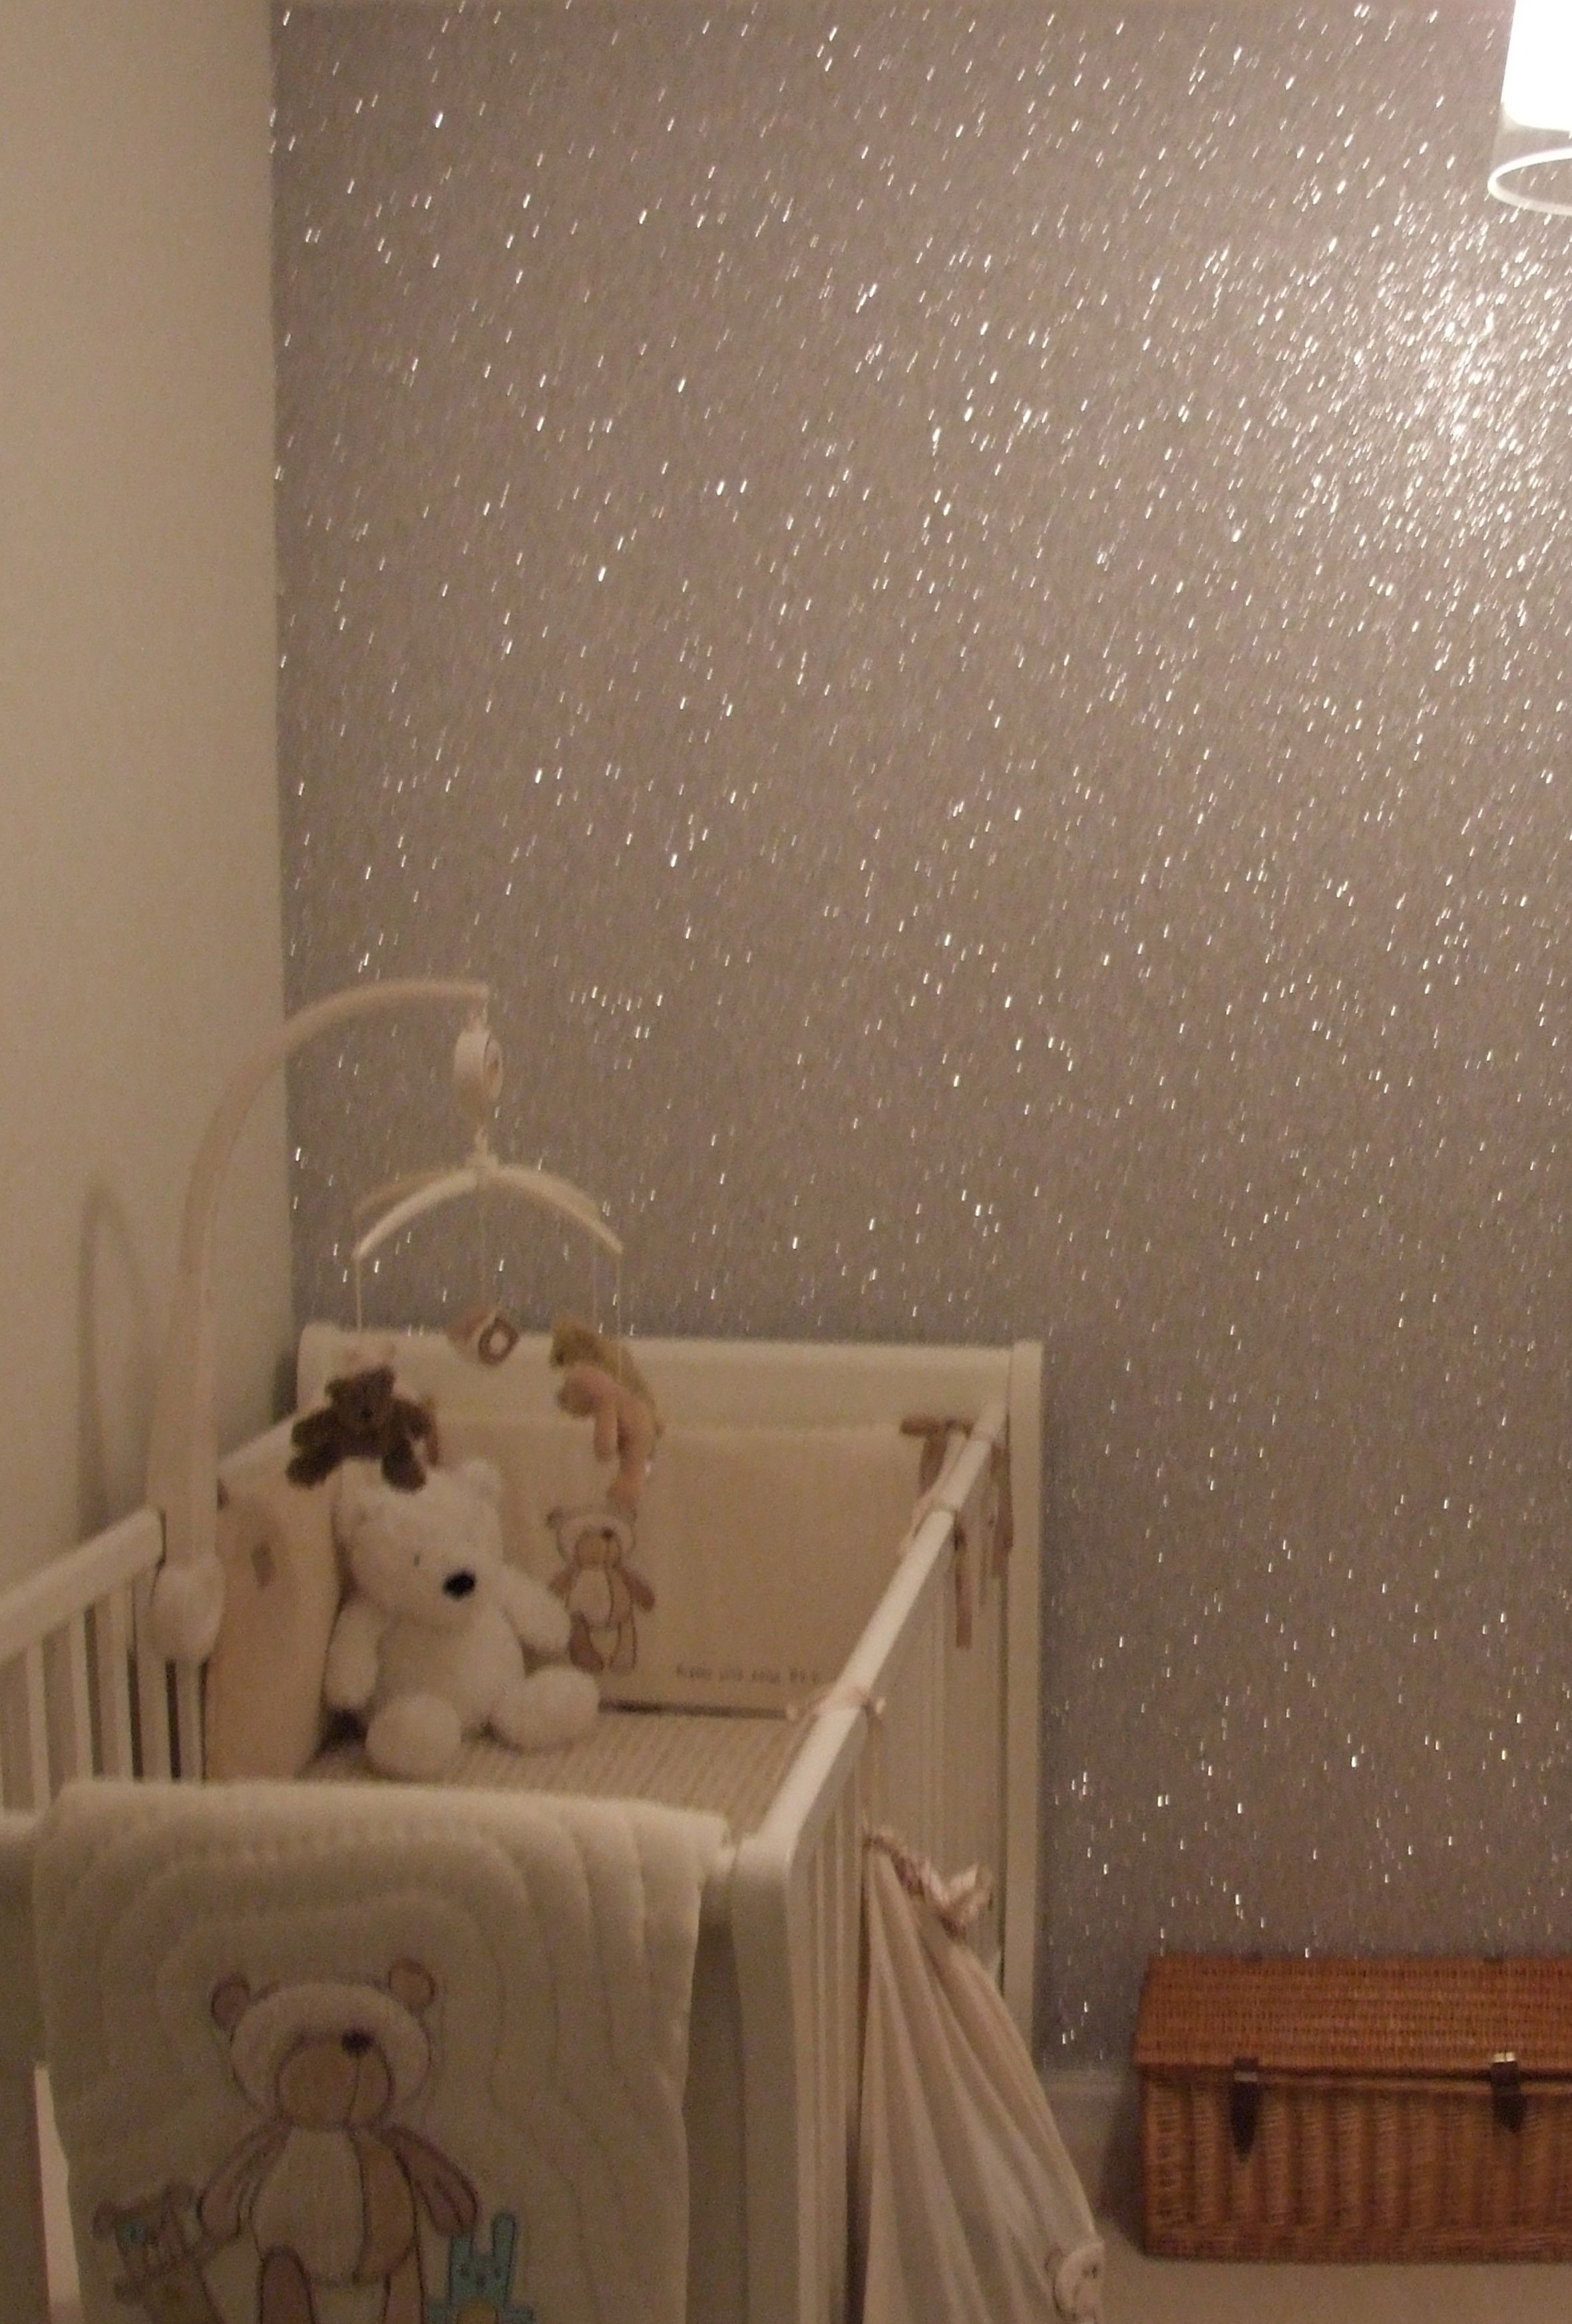 Glitter Wall, HGTV: mix a gallon of glue with glitter, then paint with it, the g